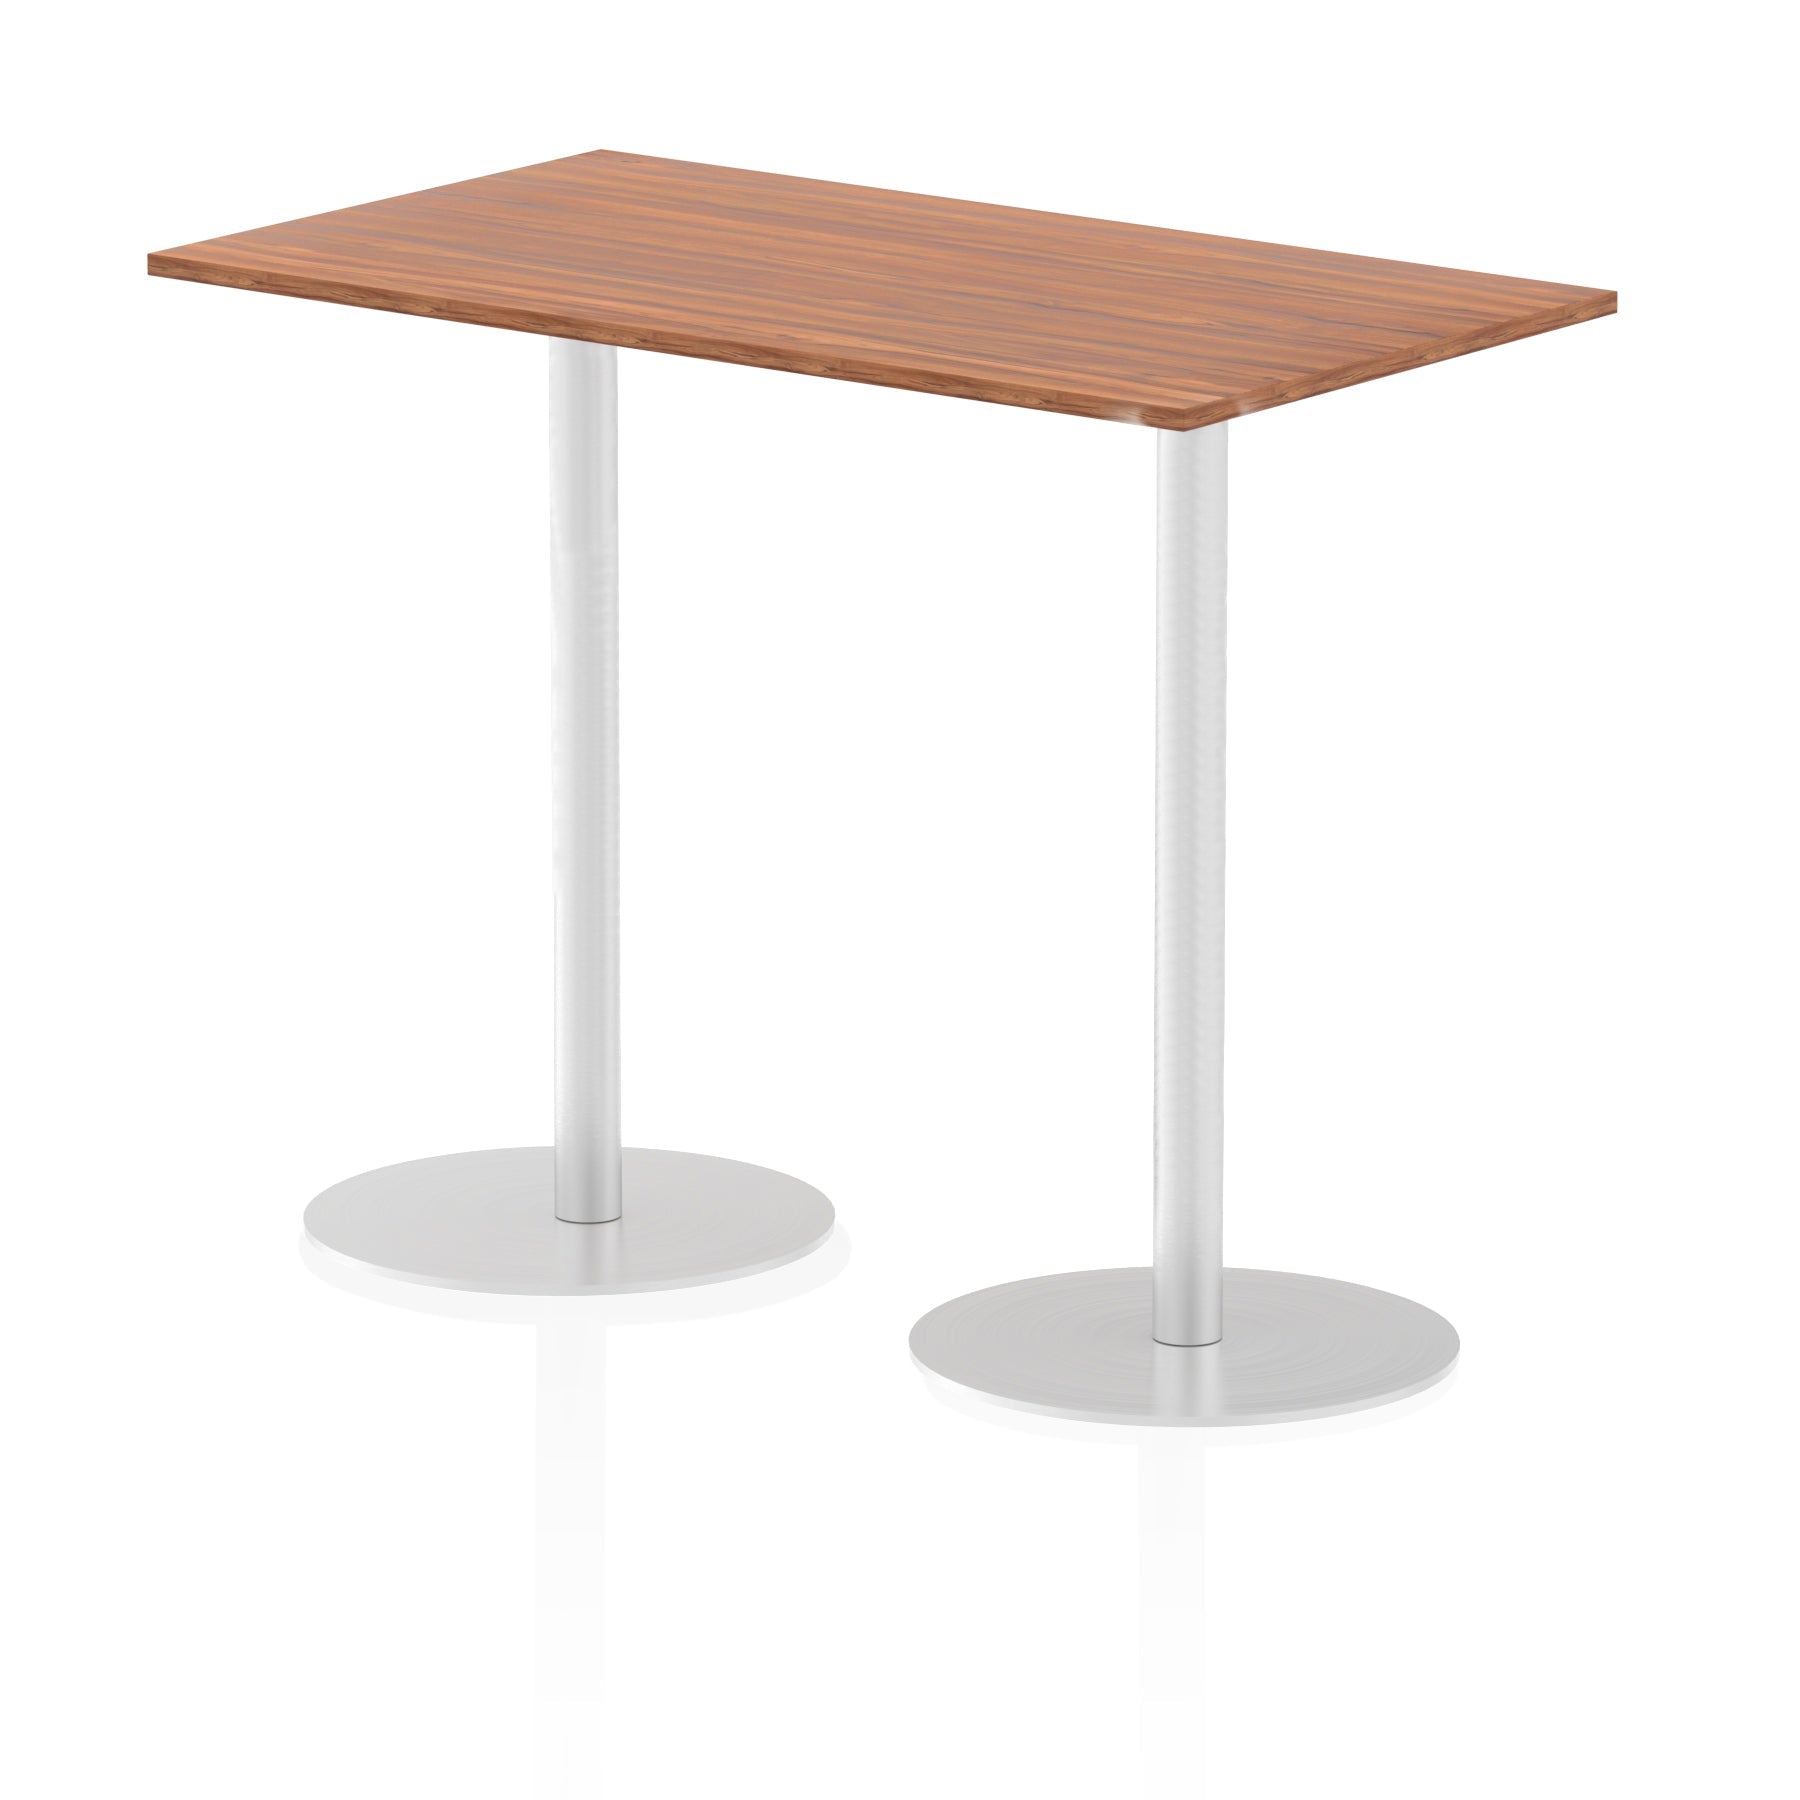 Italia Rectangular Poseur Table - MFC Material, Self-Assembly, Bistro Leg, Silver Frame, 5-Year Guarantee - Multiple Sizes (1200-1800mm Width)